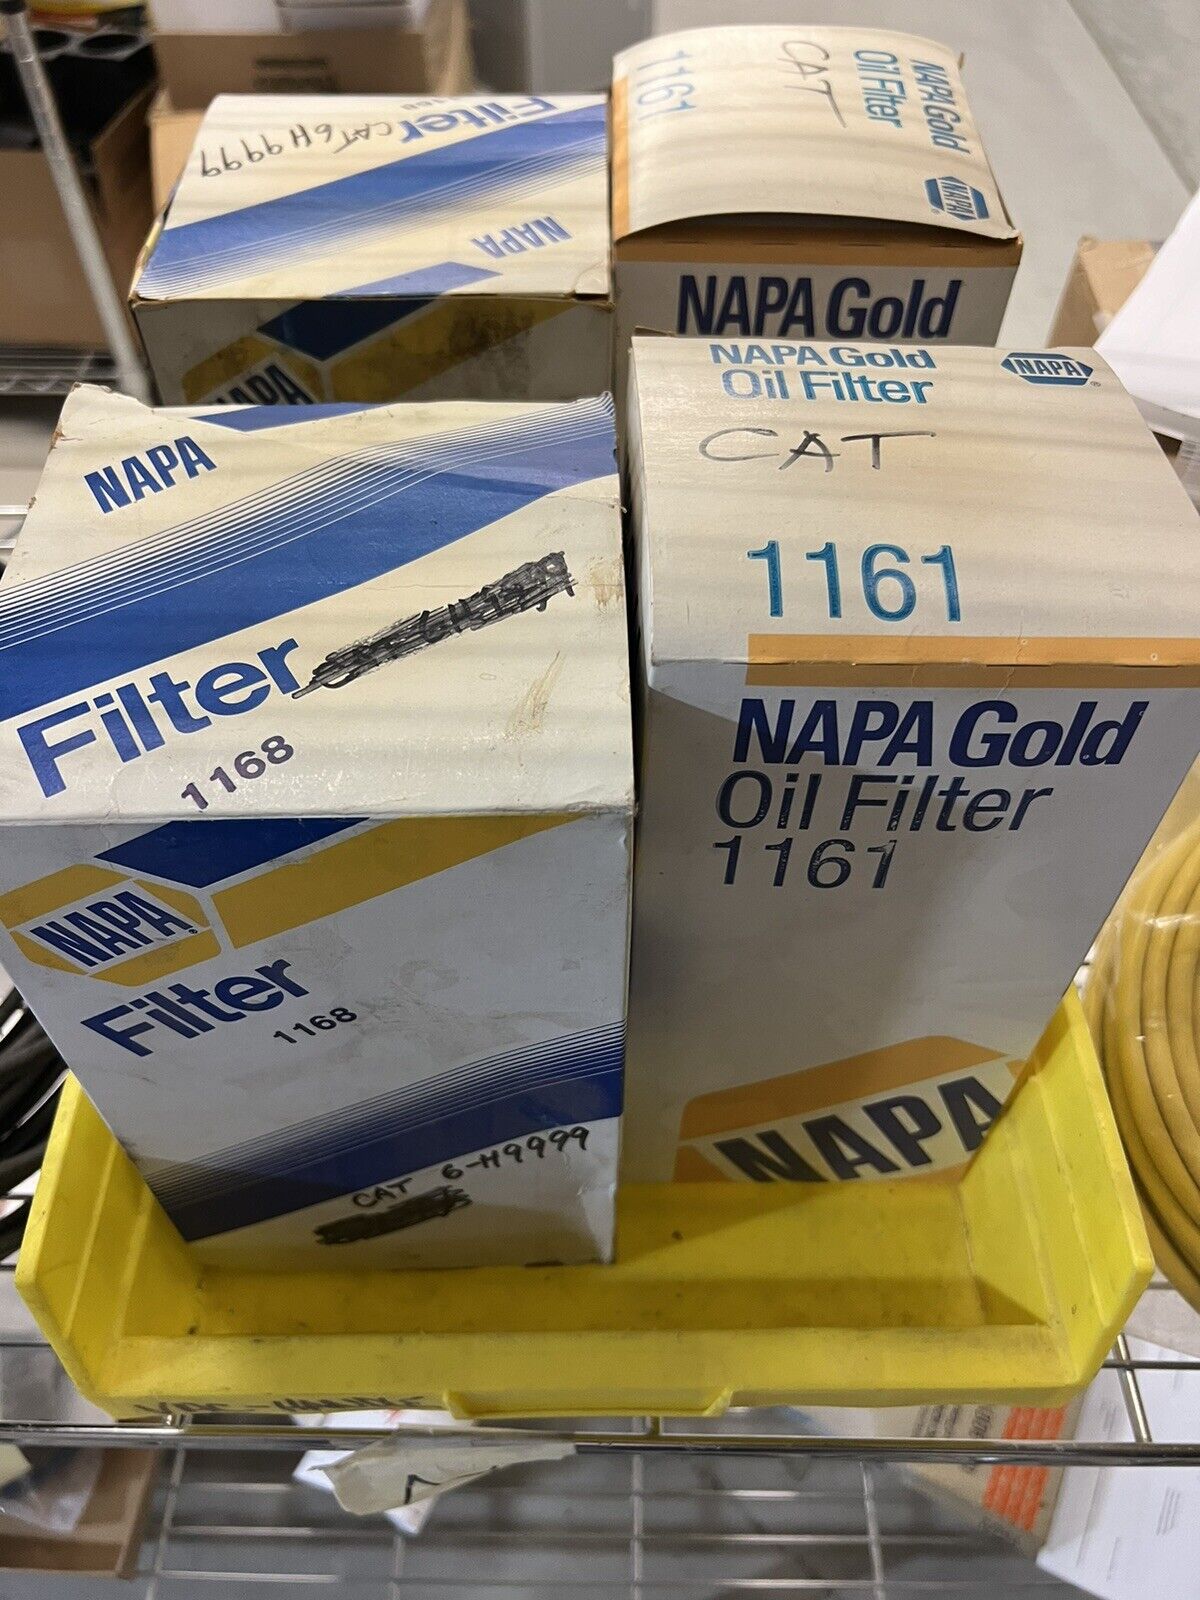 Napa Oil Filter - 1168 and 1161